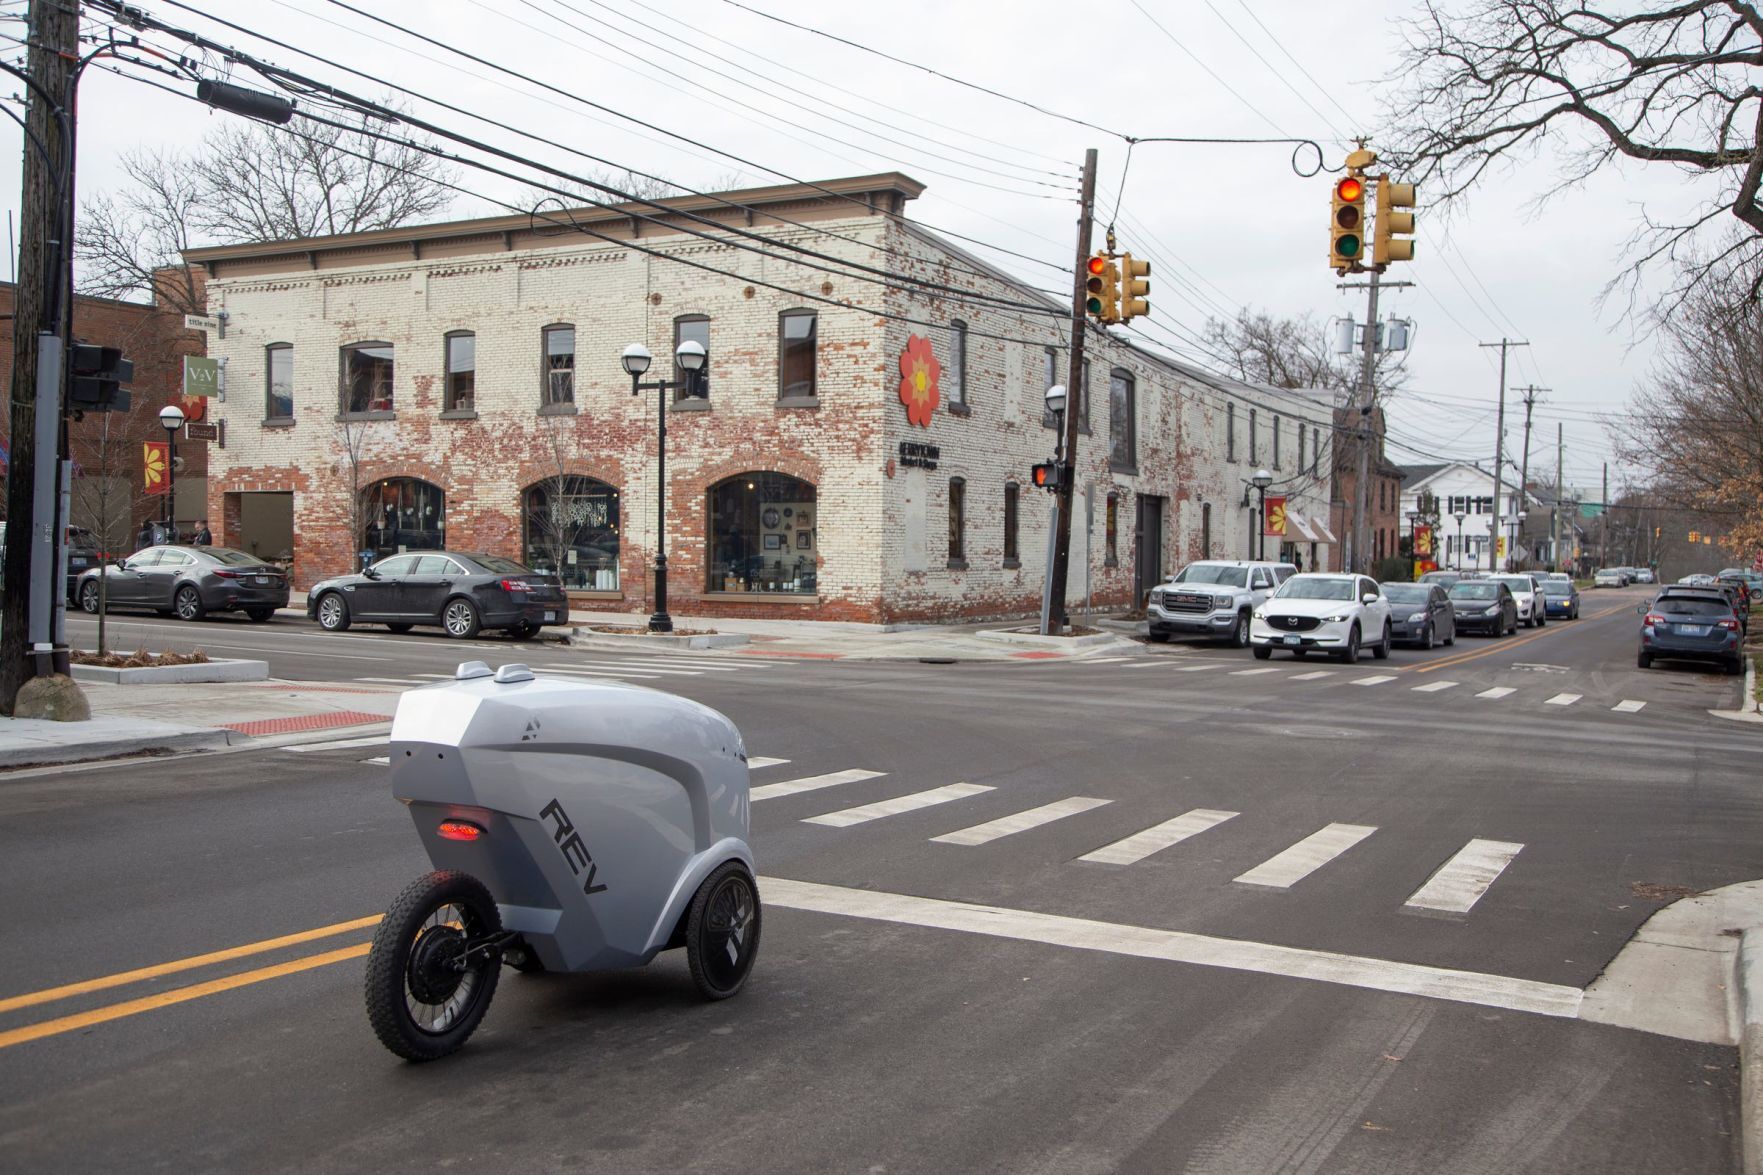 Refraction AI in Ann Arbor has developed an autonomous delivery robot. The first generation Rev1 sits at a red light in Kerrytown while on a mission to deliver sandwiches in downtown Ann Arbor.  PHOTO CREDIT: Tribune News Service